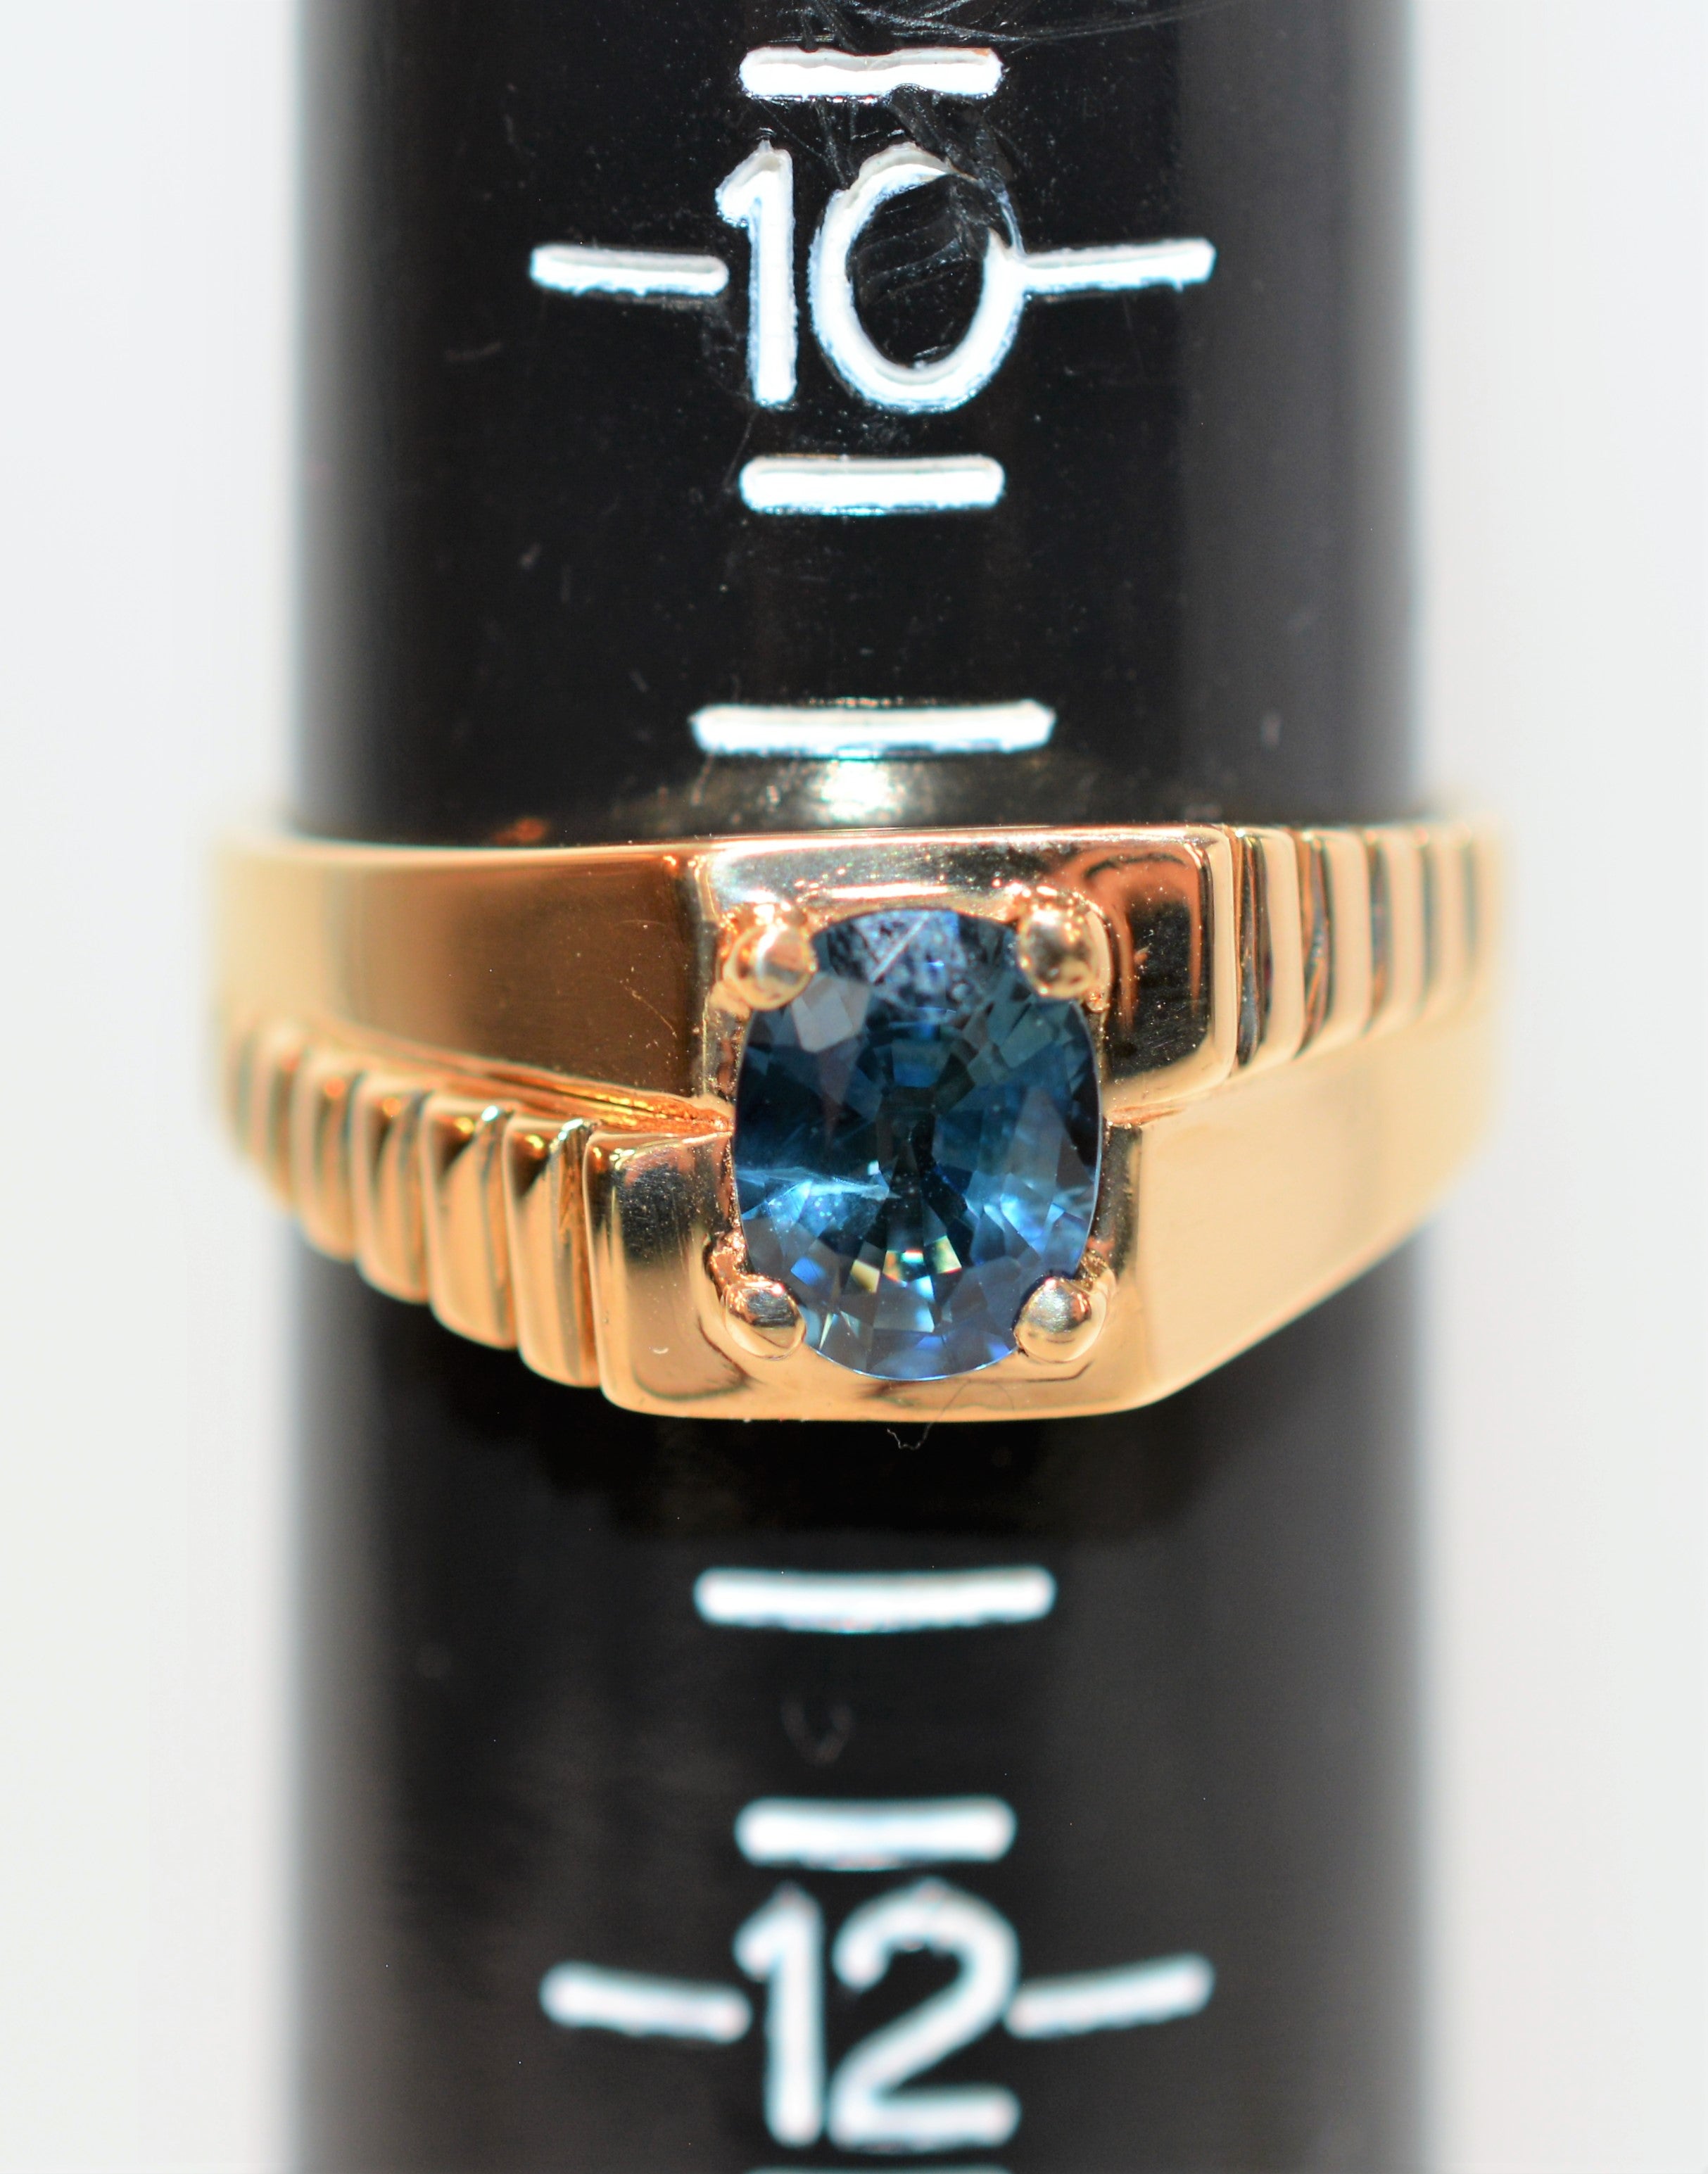 Natural Ceylon Sapphire Ring 10K Solid Gold 1.62ct Sri Lankan Sapphire Ring Solitaire Ring Gemstone Ring Statement Ring Men's Ring Jewellery